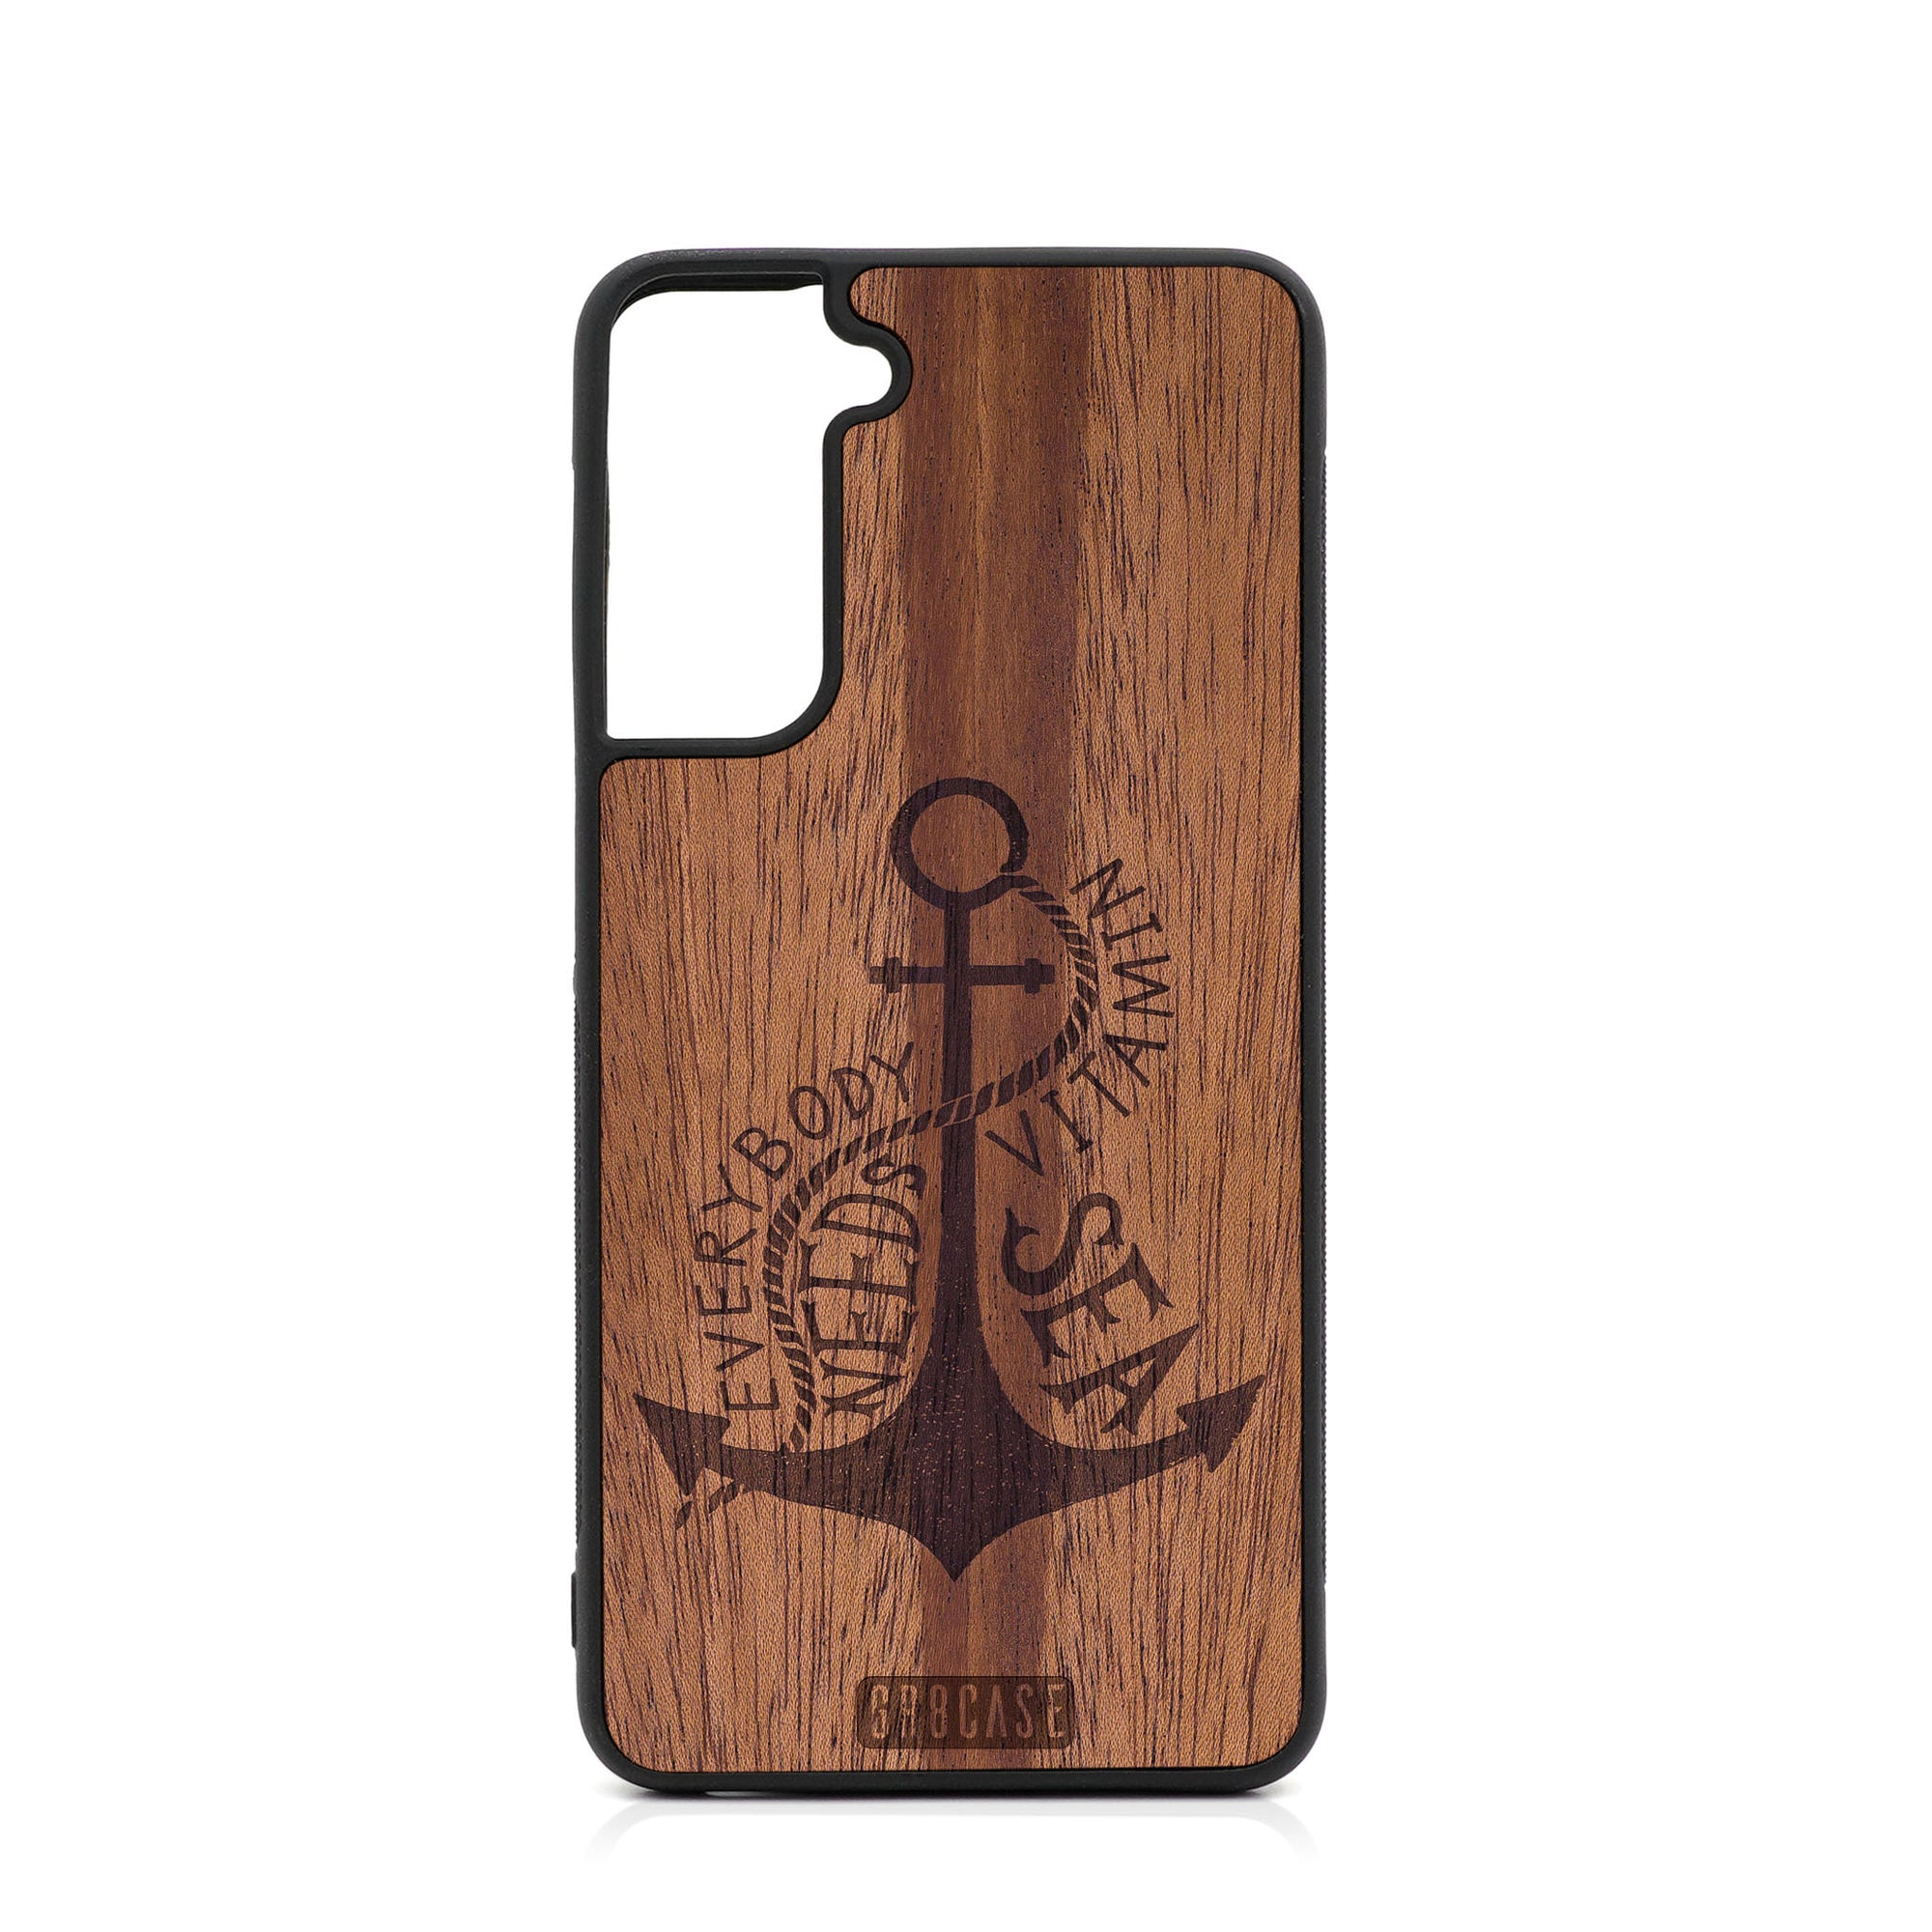 Everybody Needs Vitamin Sea (Anchor) Design Wood Case For Samsung Galaxy S21 Plus 5G